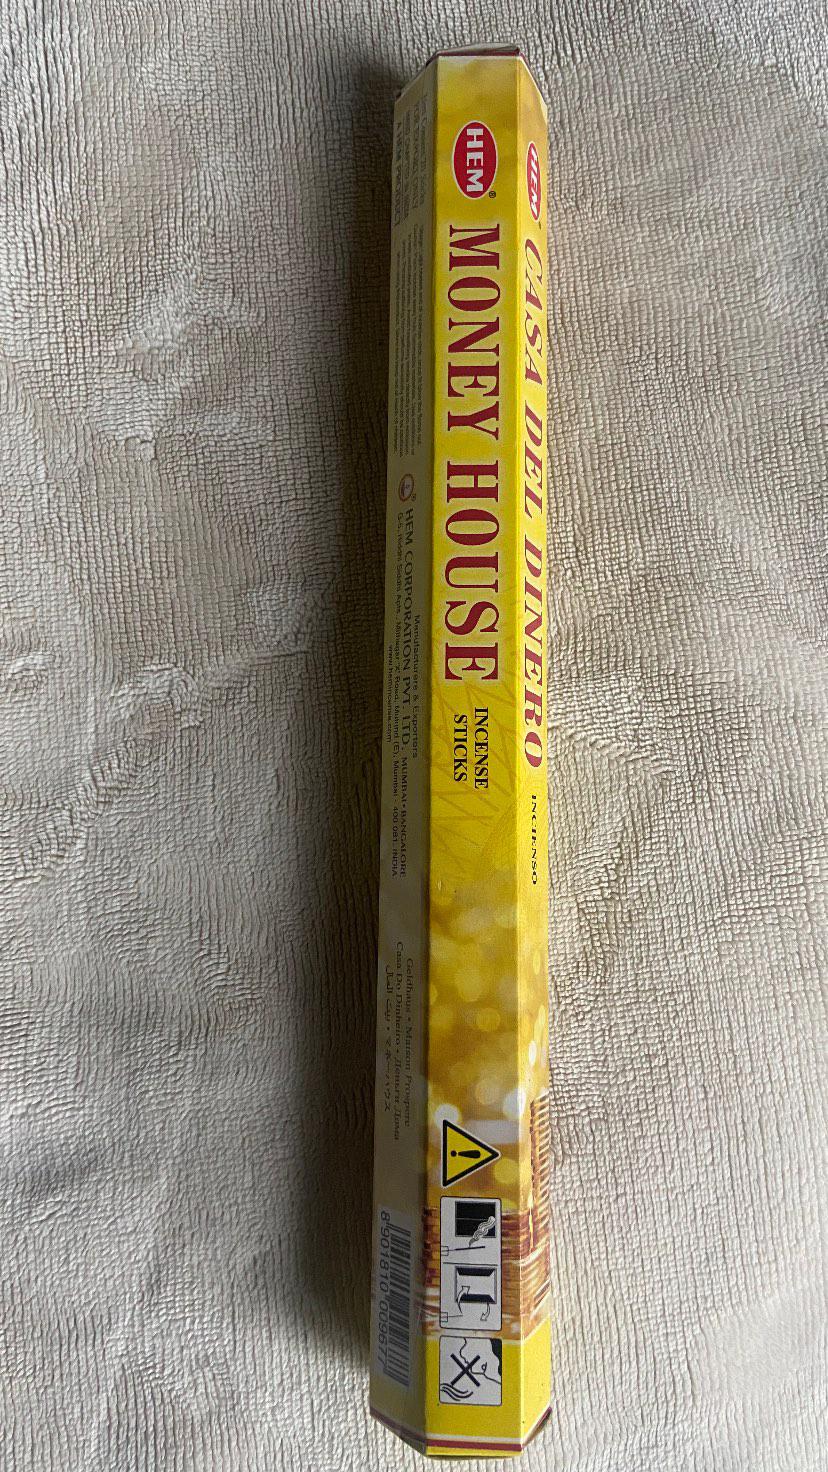  Money House Incense Sticks - Incense available at Amazing Creations Products . Grab yours for $4.99 today!